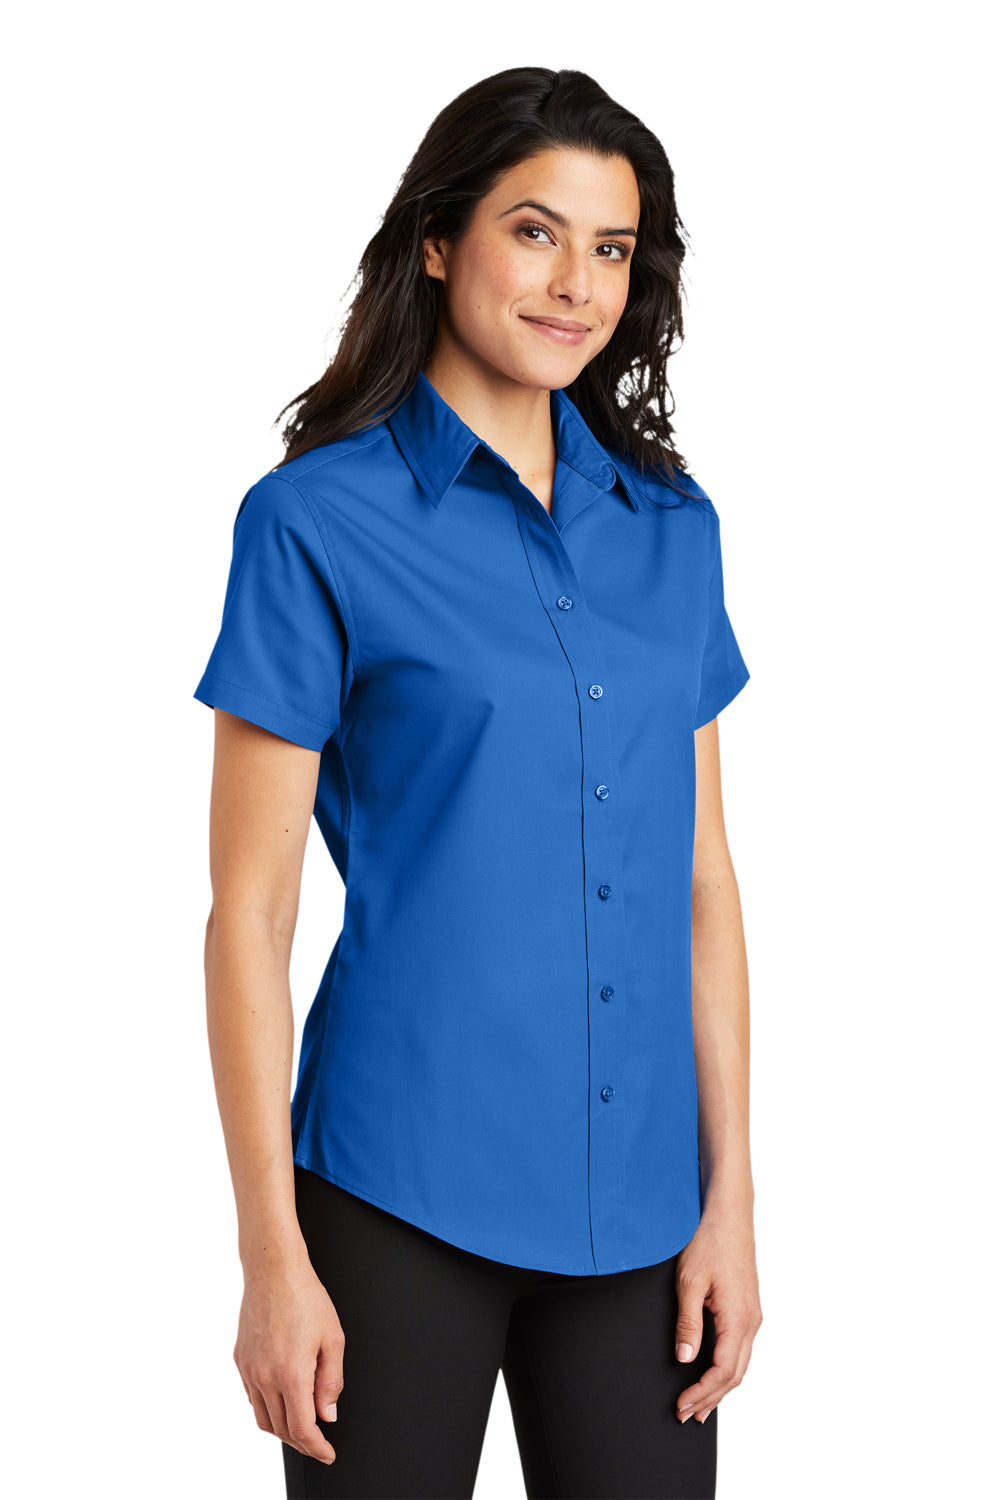 Port Authority L508 Womens Easy Care Wrinkle Resistant Short Sleeve Button Down Shirt Strong Blue 3Q